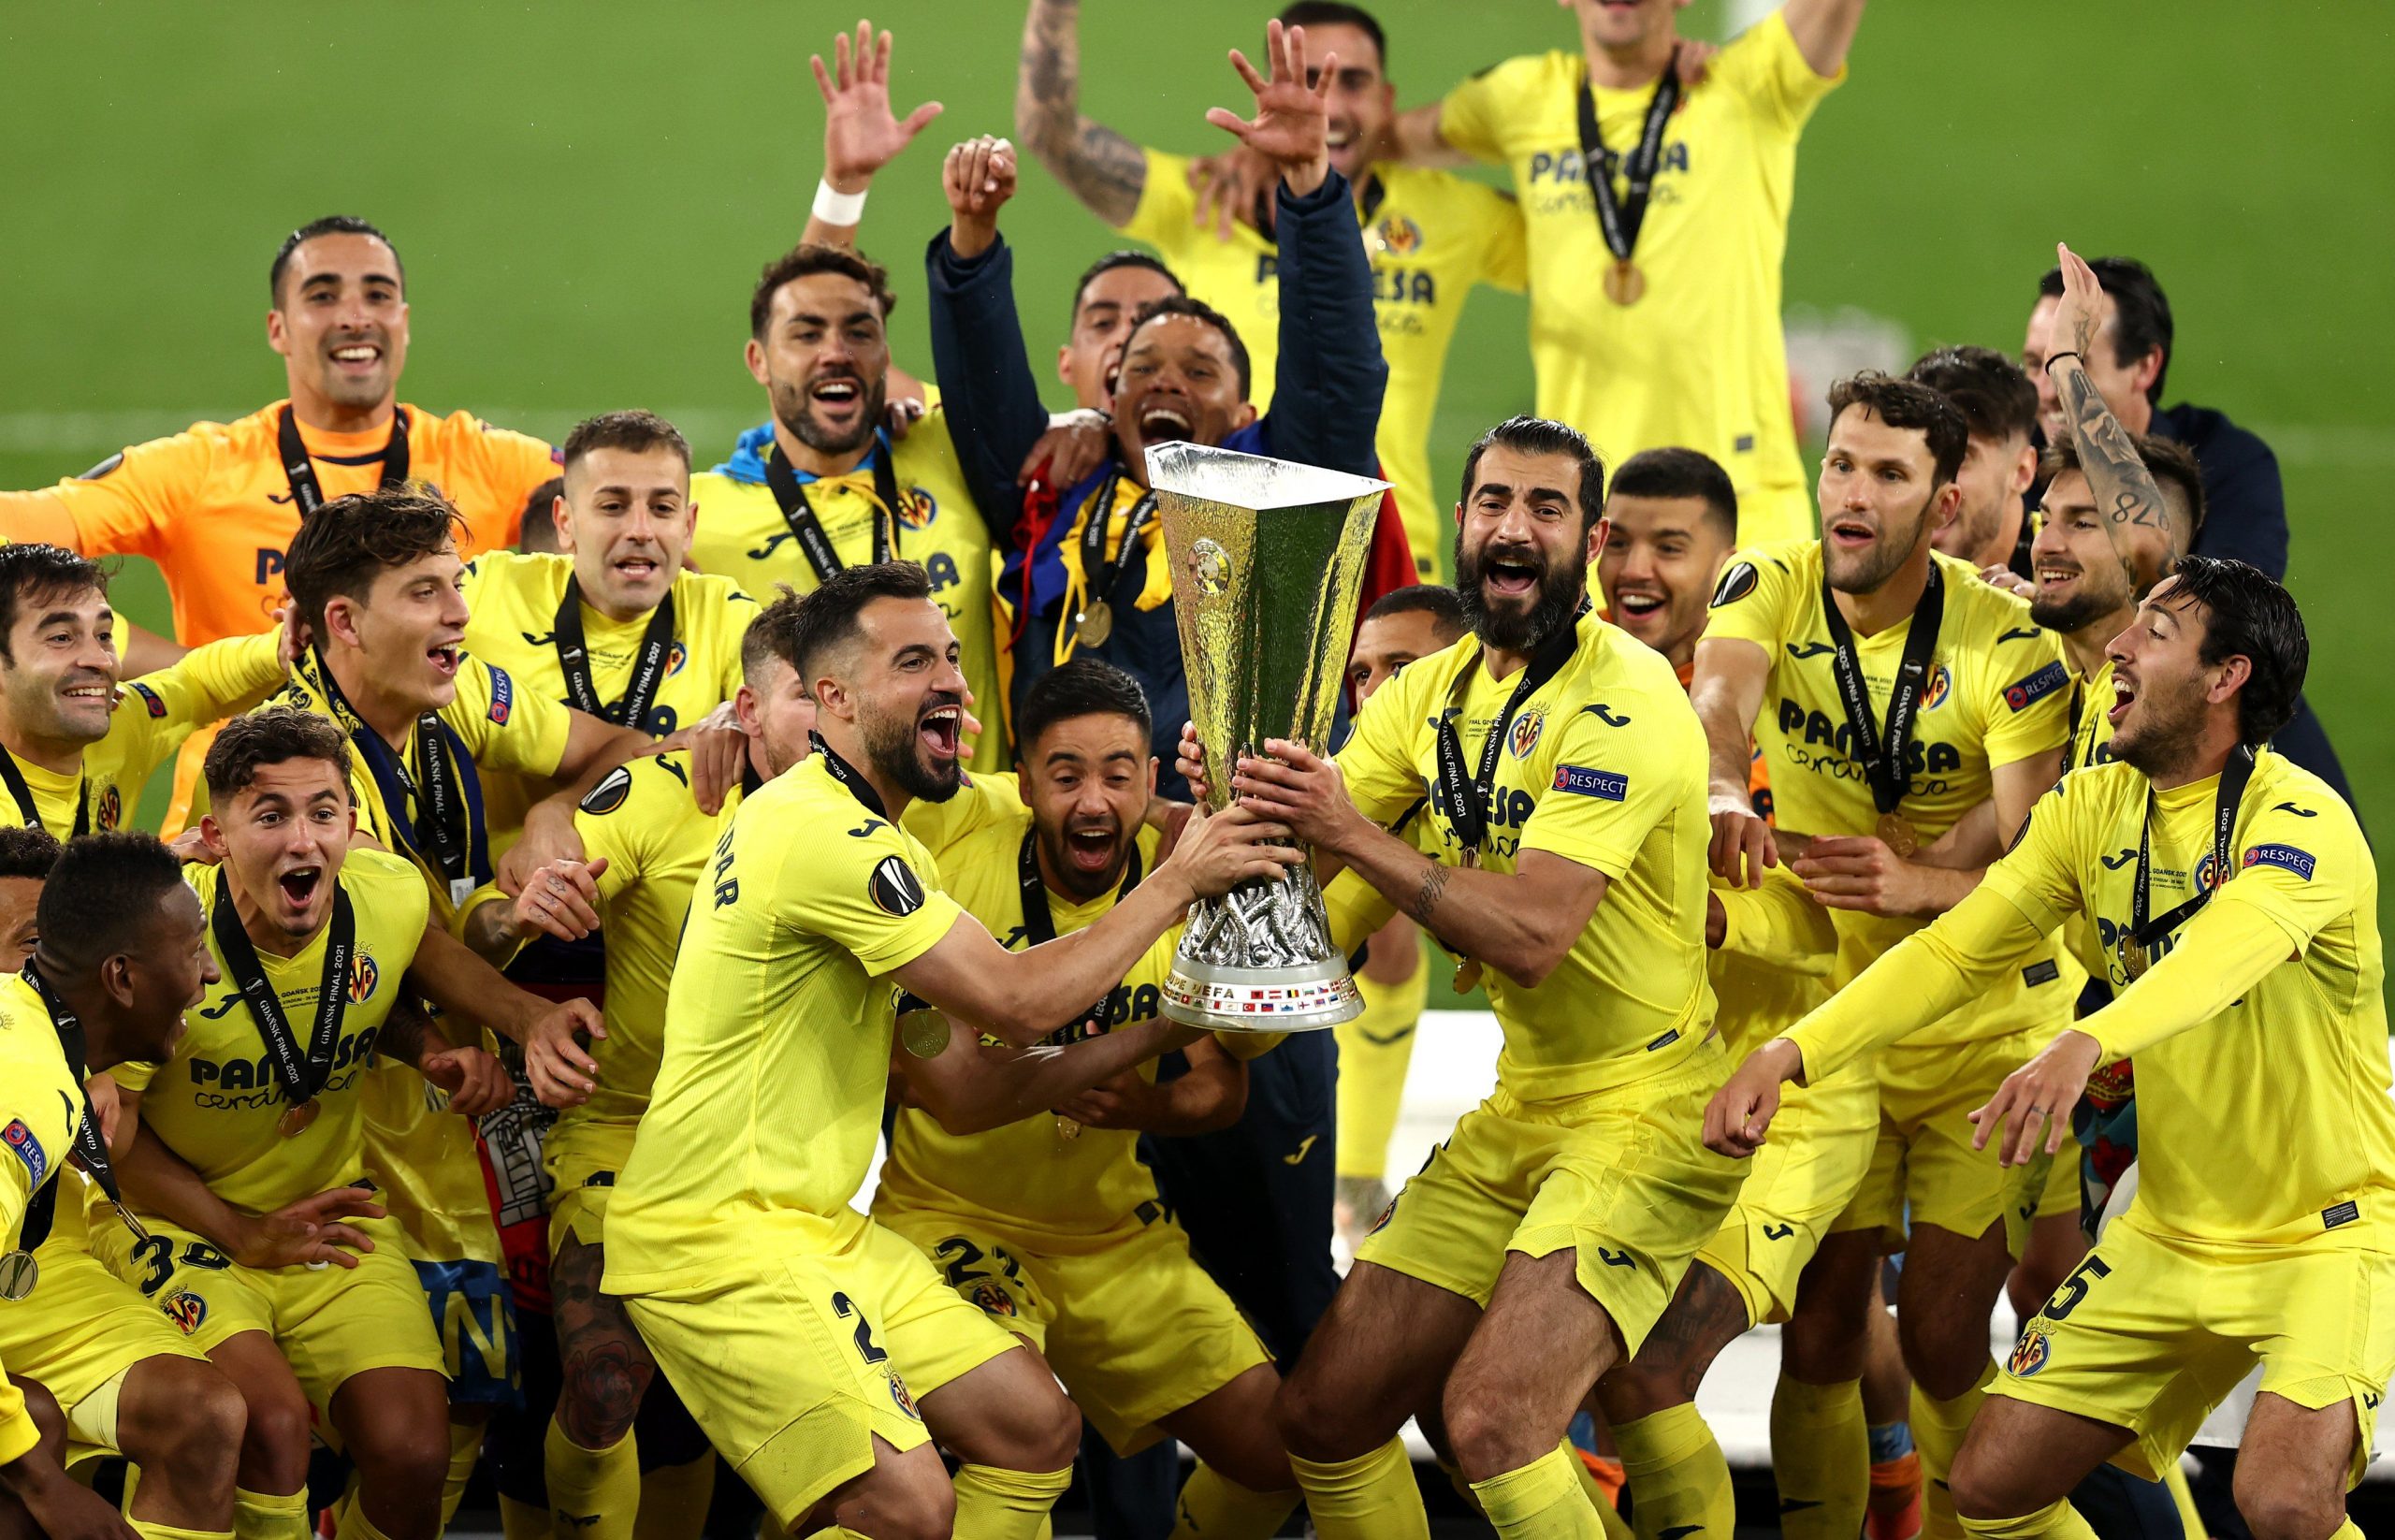 Will never forget: Fans react to Villareal epic Europa final victory against Man Utd